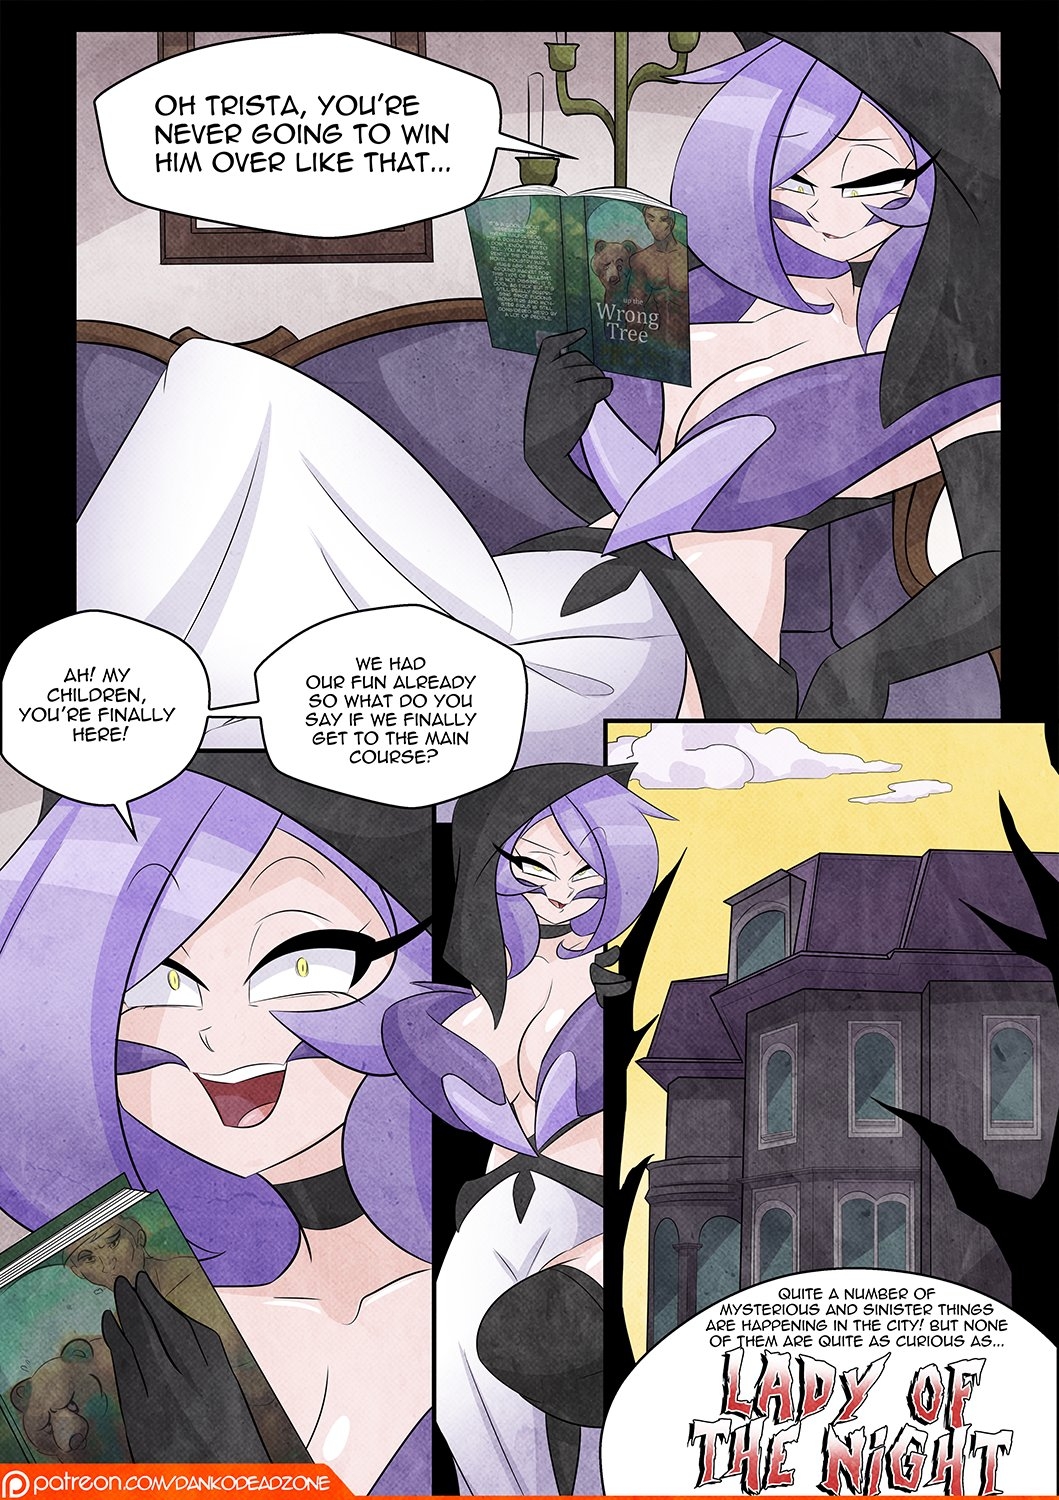 [DankoDeadZone] Lady of the Night Issue 1 [Ongoing] 1